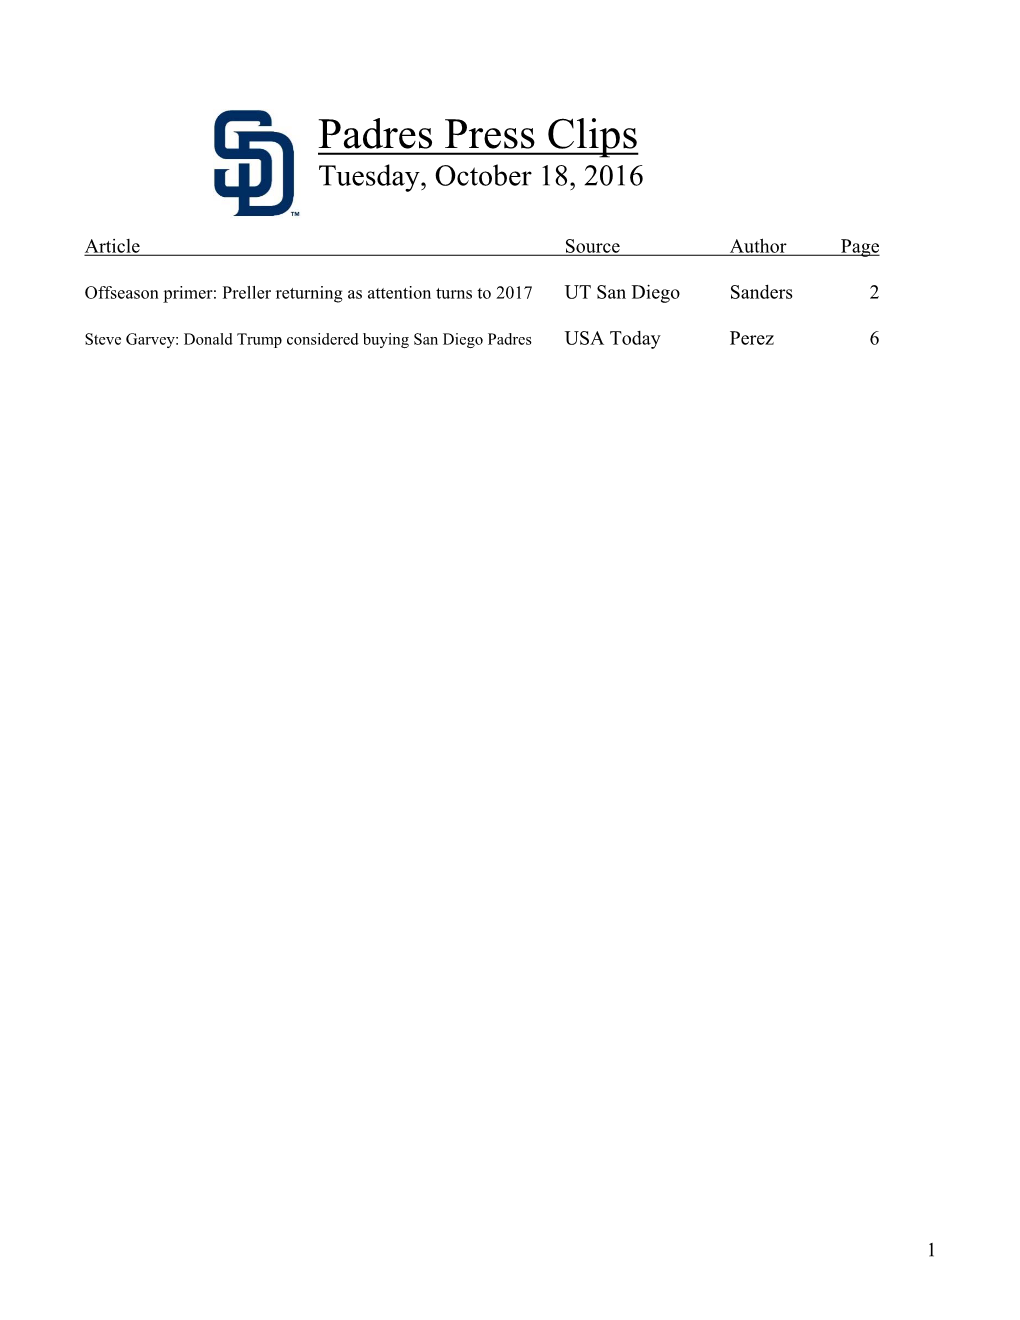 Padres Press Clips Tuesday, October 18, 2016